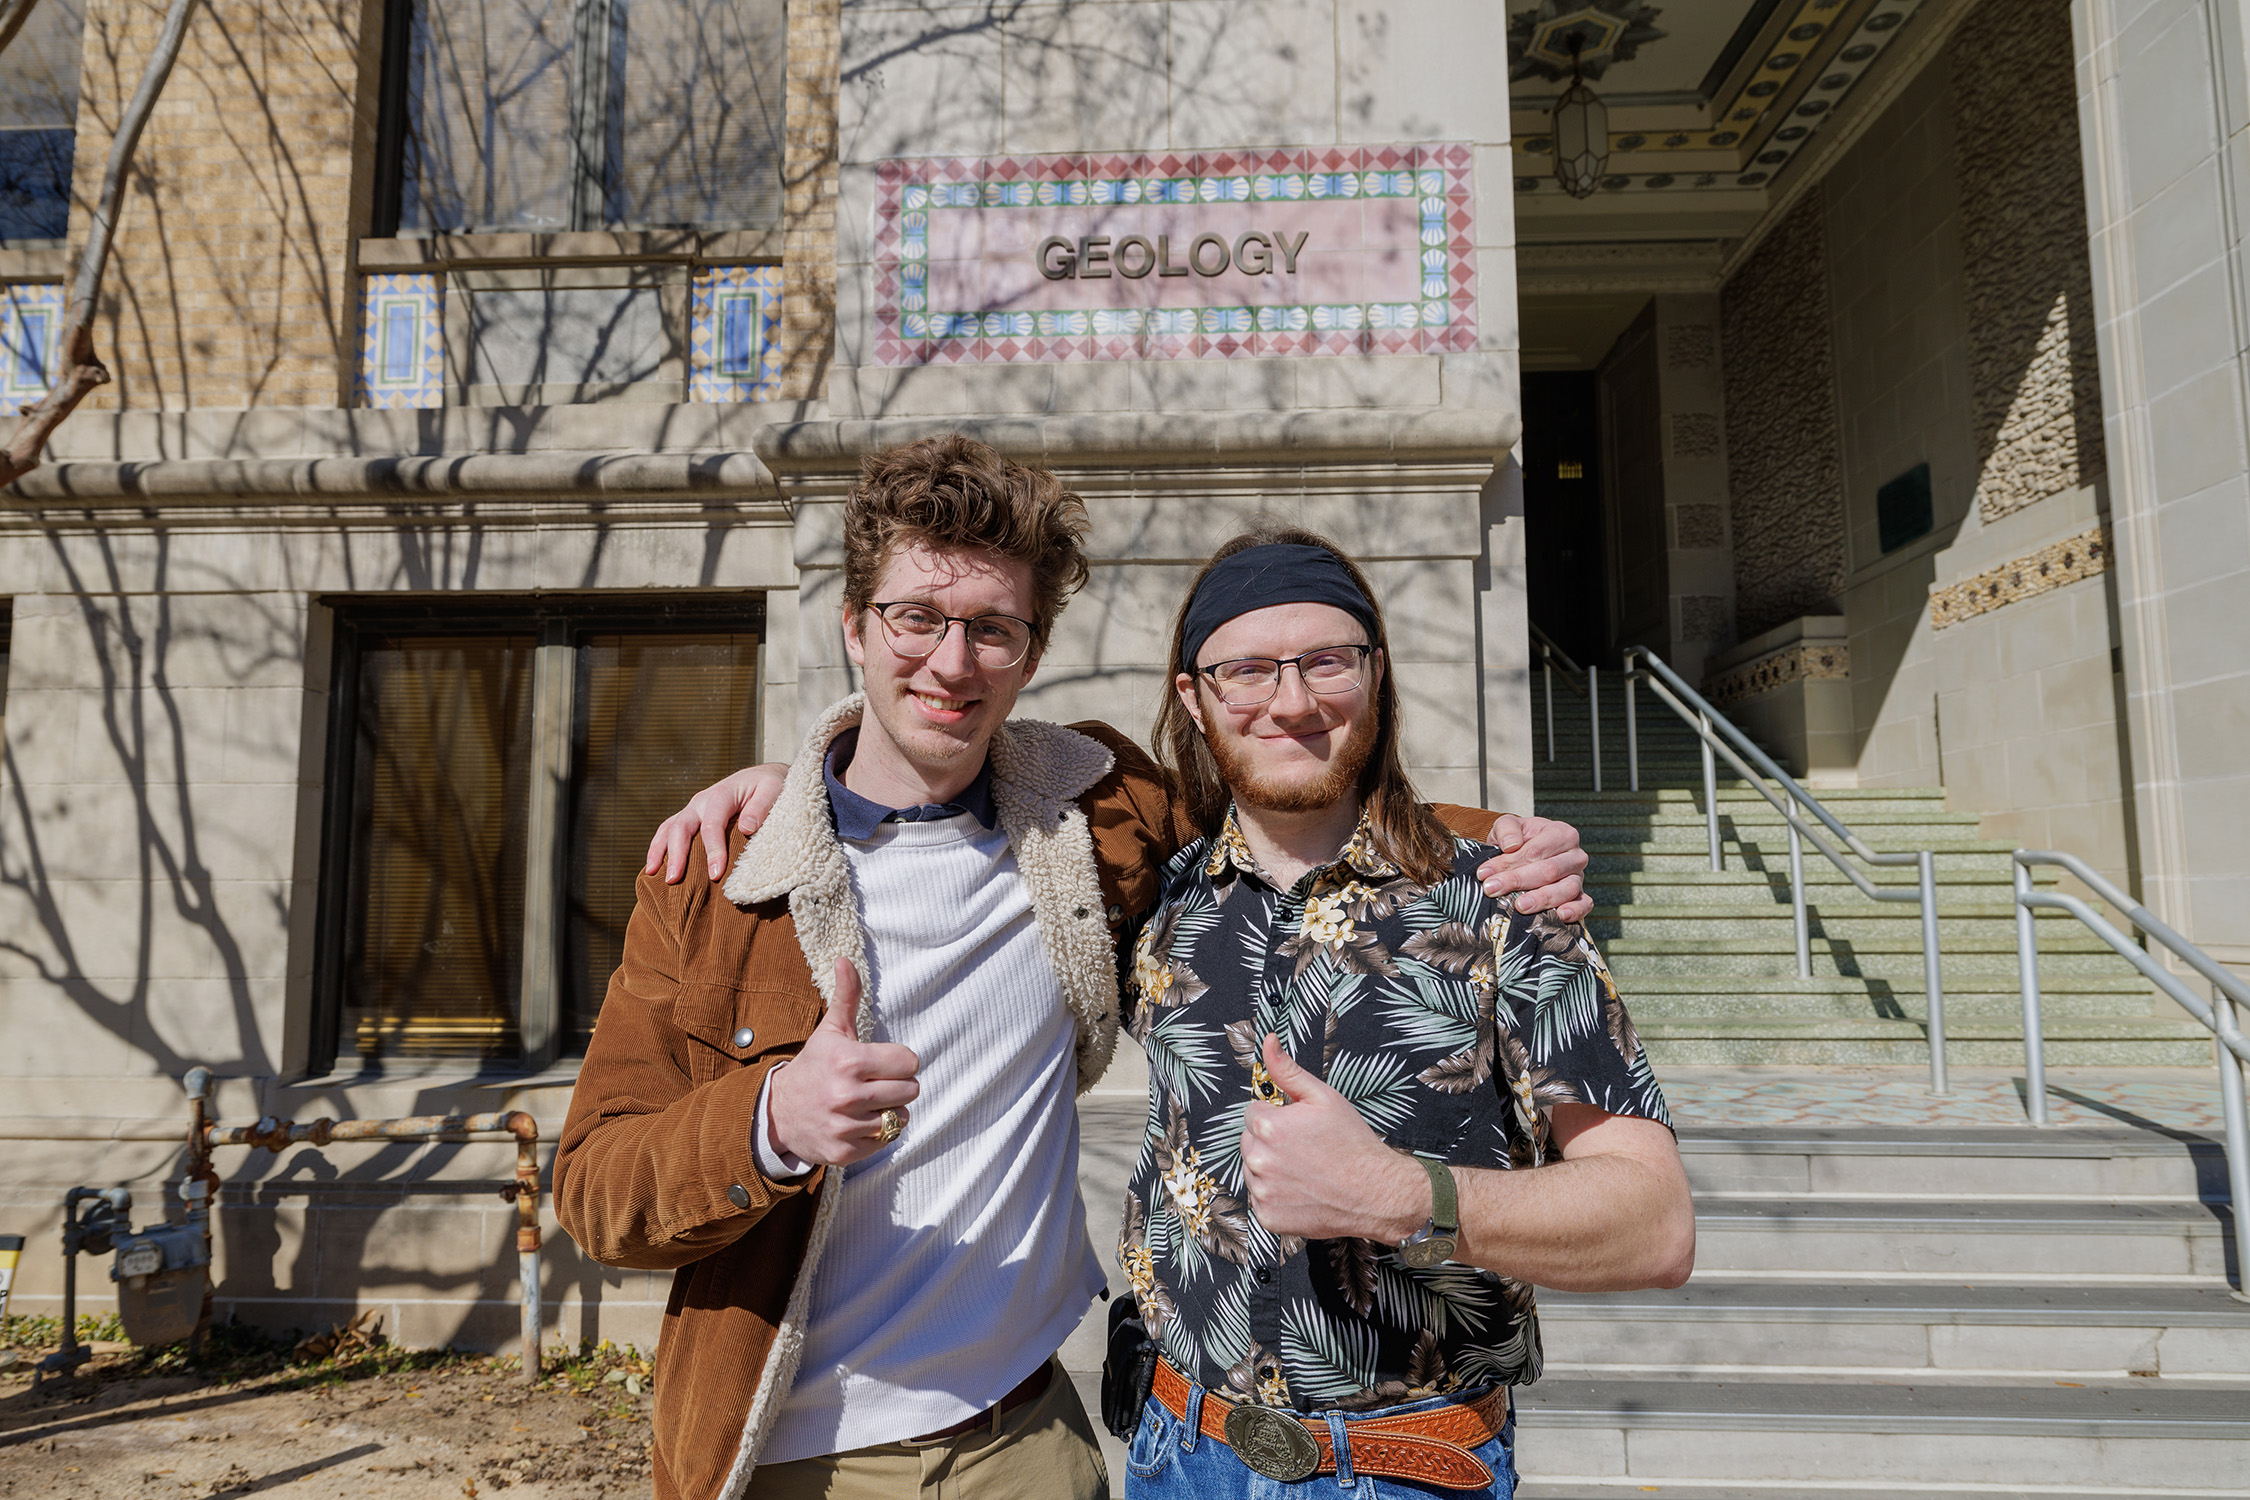 Texas A&M University geology graduate students Dirk van de Laar and Reid "Zeke" Buskirk pose arm in arm while flashing thumbs up signs outside the Halbouty Geosciences Building on the Texas A&M campus